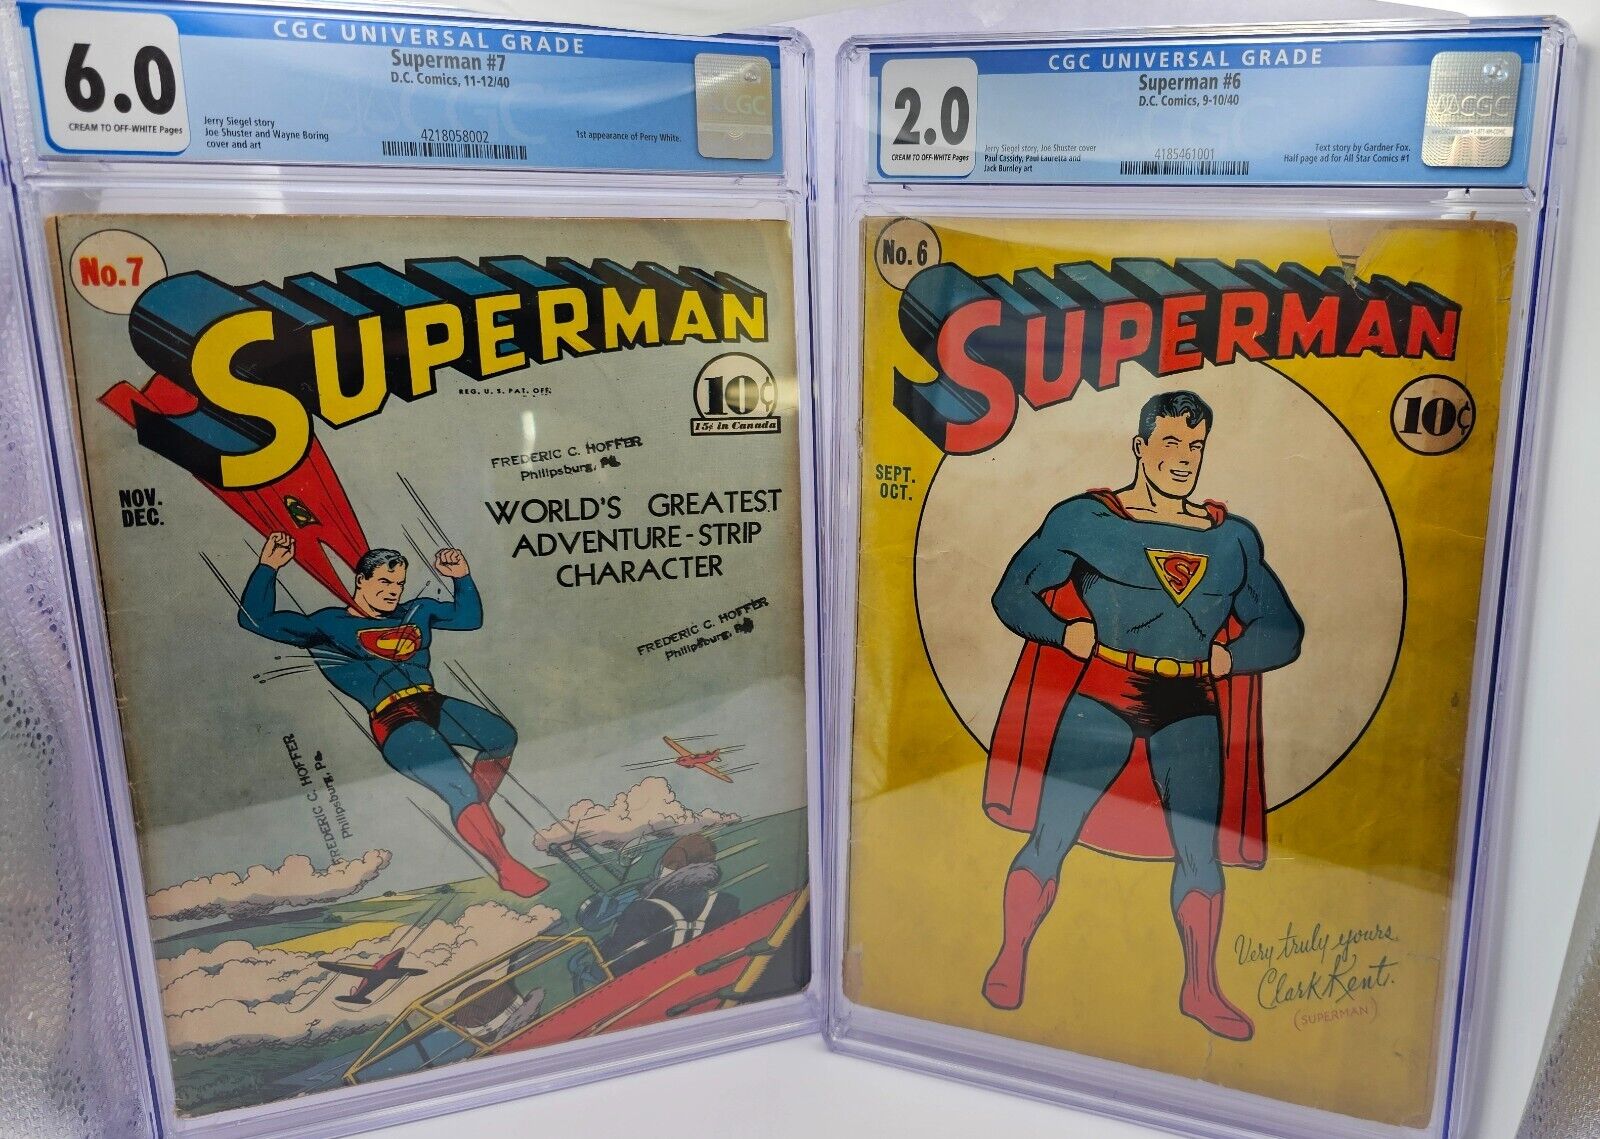 CGC SUPERMAN #6 & #7 Graded 6.0 and 2.0 D.C. COMICS 1940 GOLDEN AGE 84 Years old